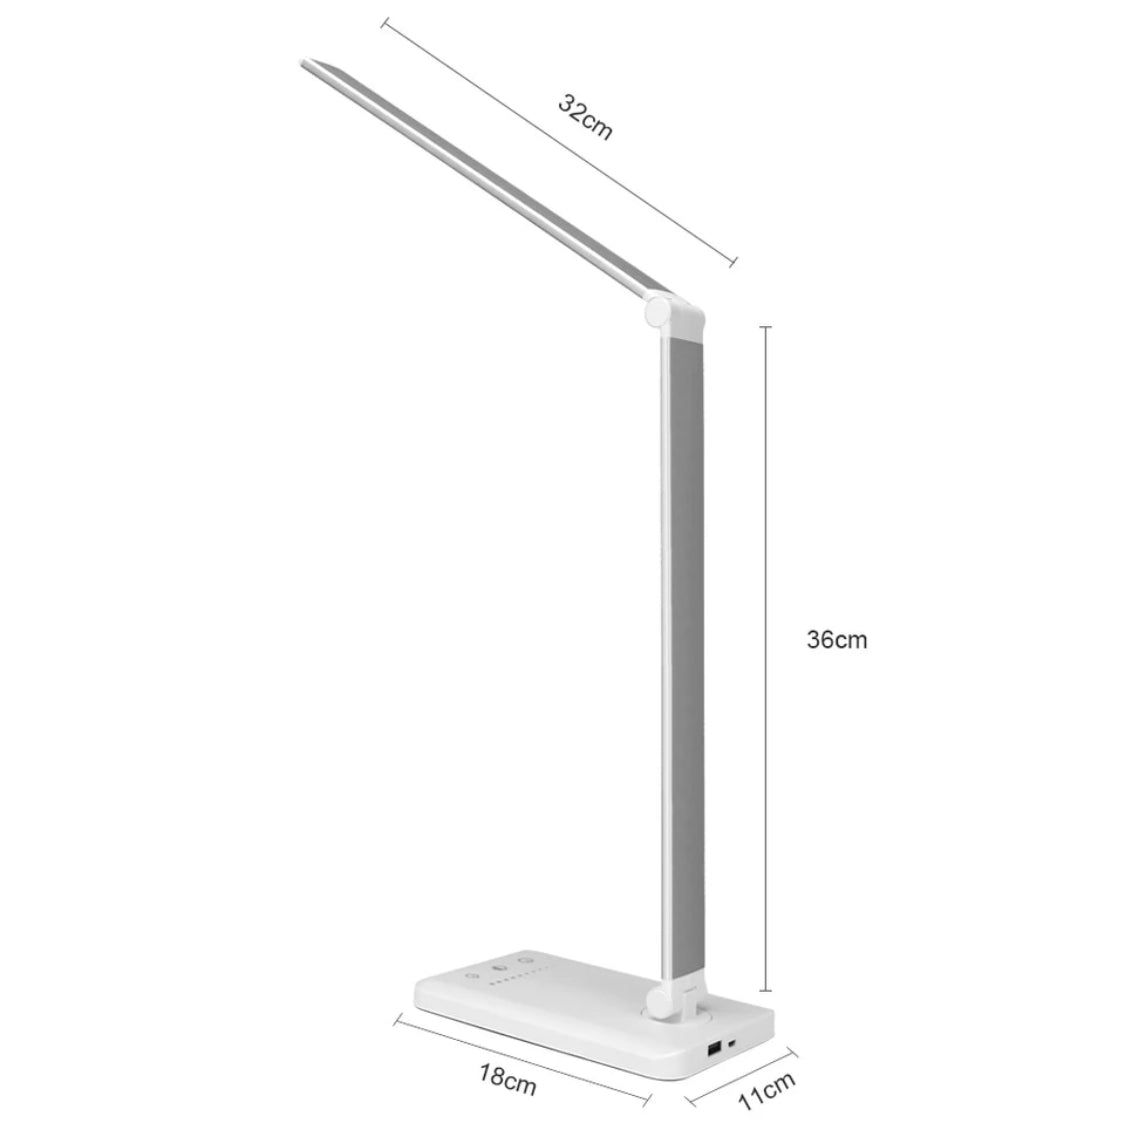 Dimmable USB Desk Lamp and Reading Light - Silver